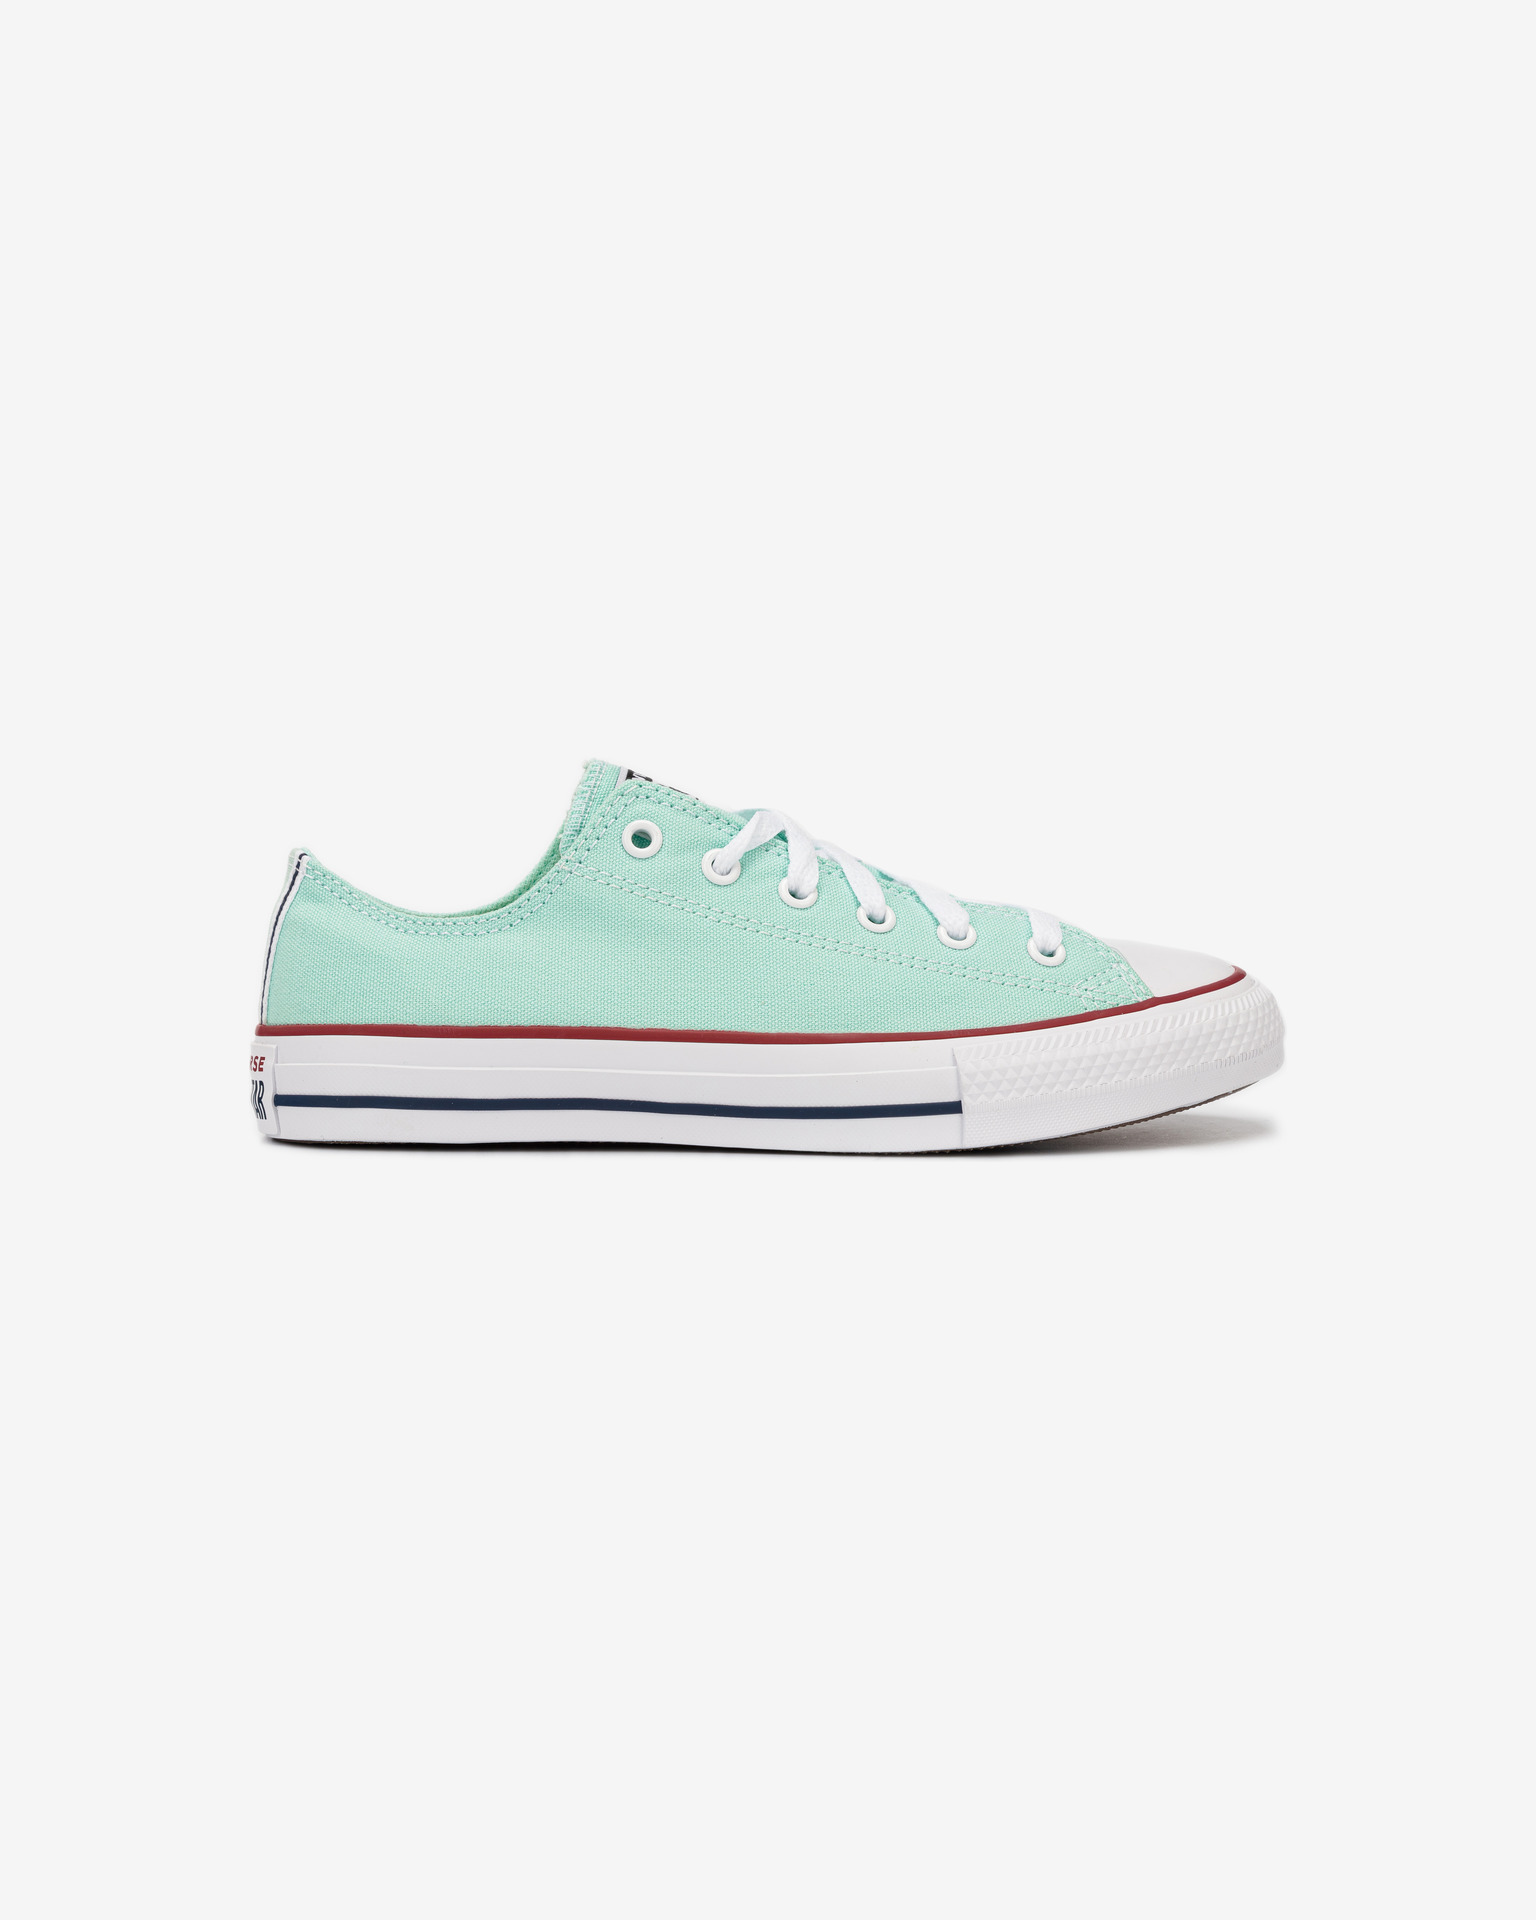 Orgulloso Suplemento simultáneo Converse - Chuck Taylor All Star Ox Kids Sneakers | Bibloo.es